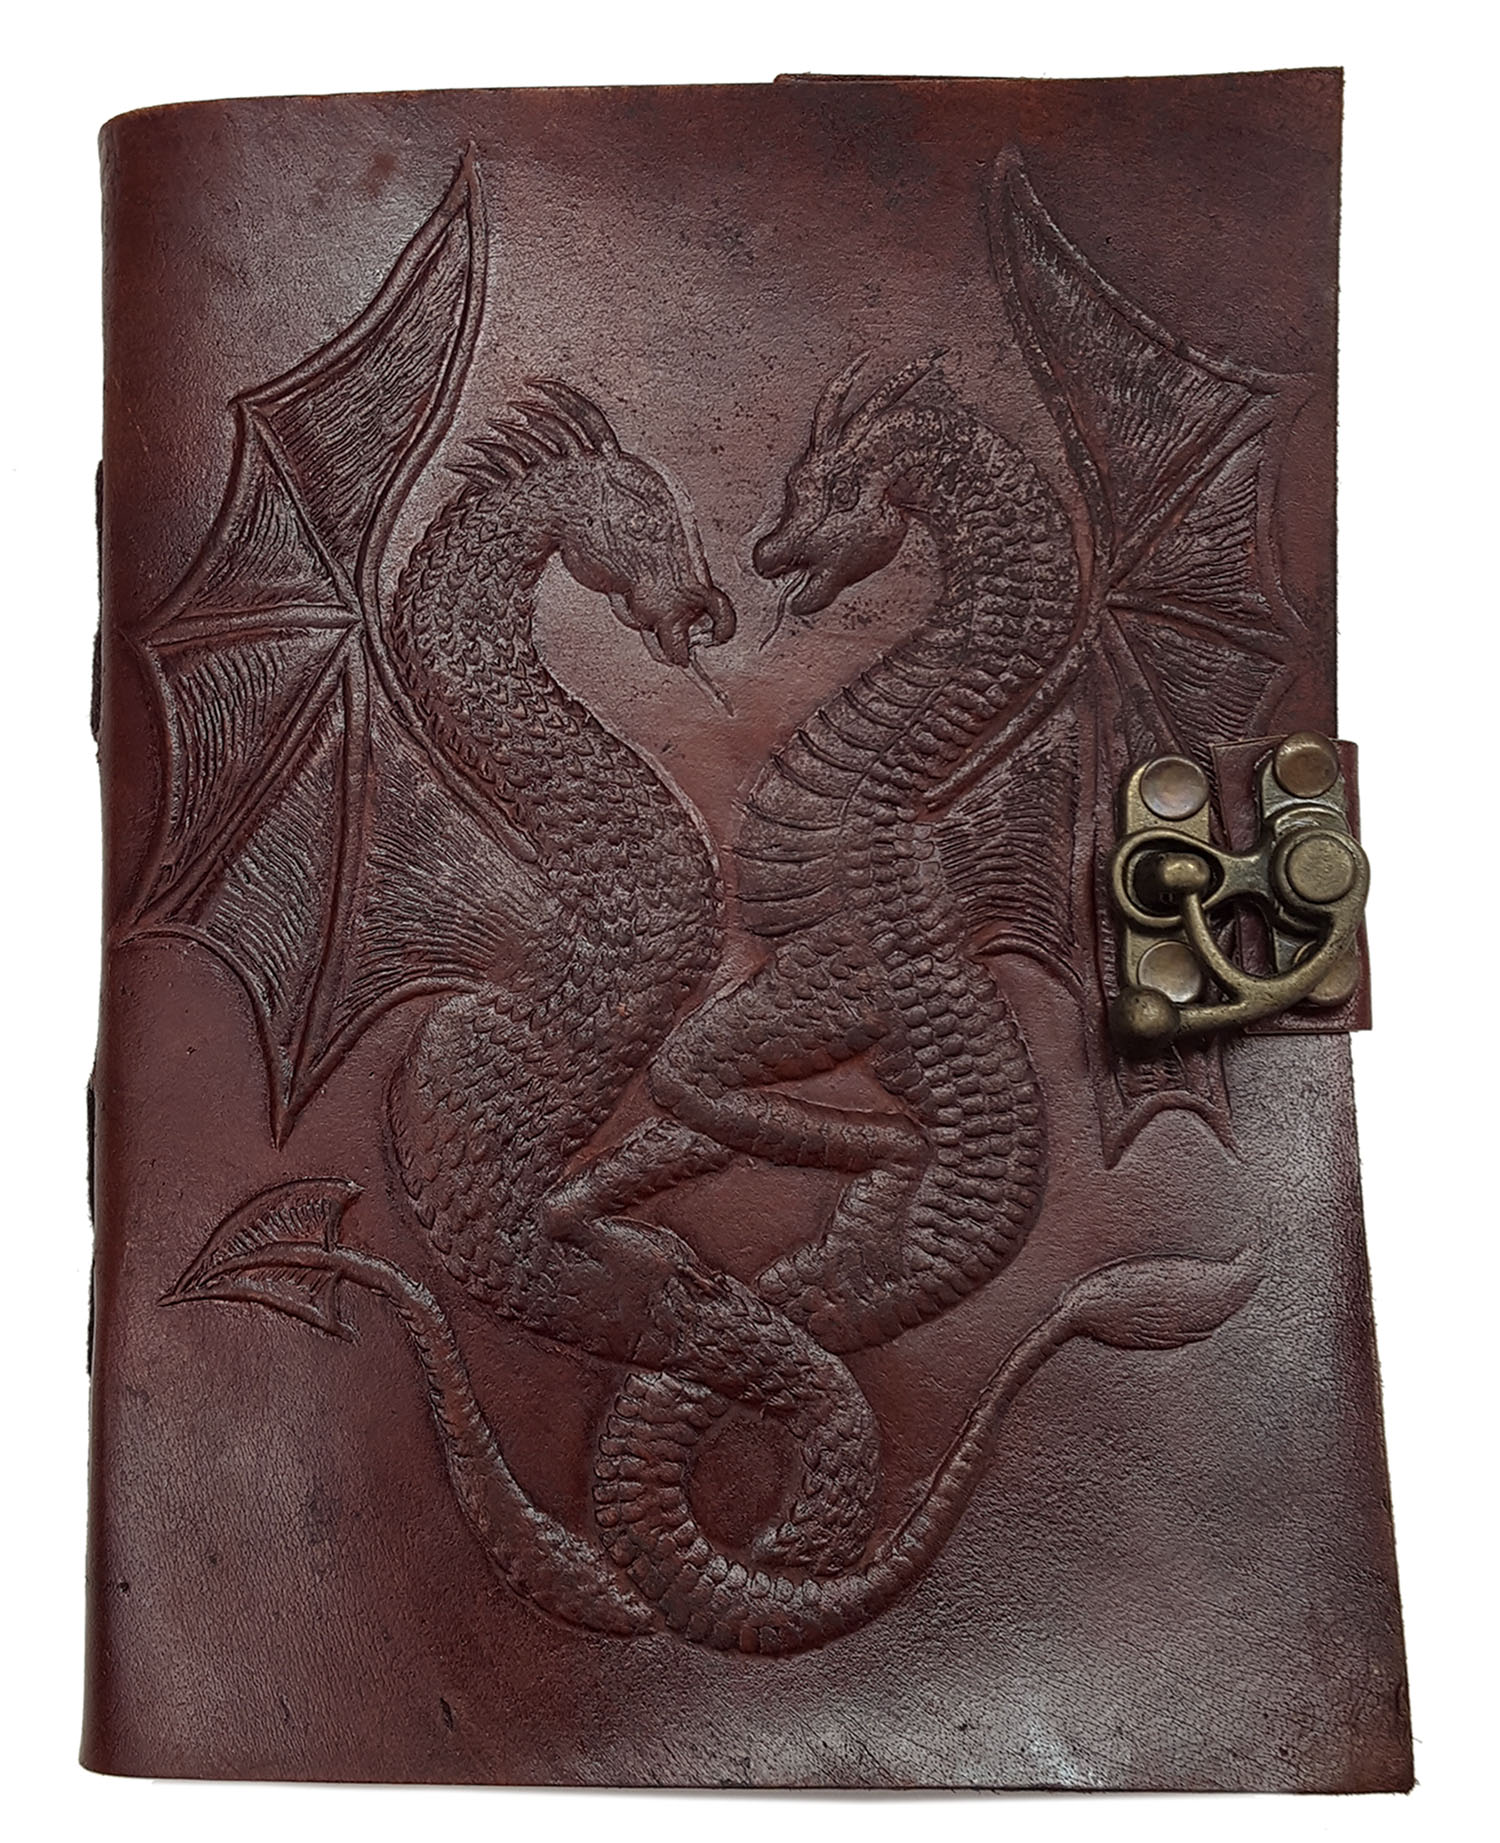 Genuine leather-bound  6" by 4.5" Chinese Dragon journal notebook 